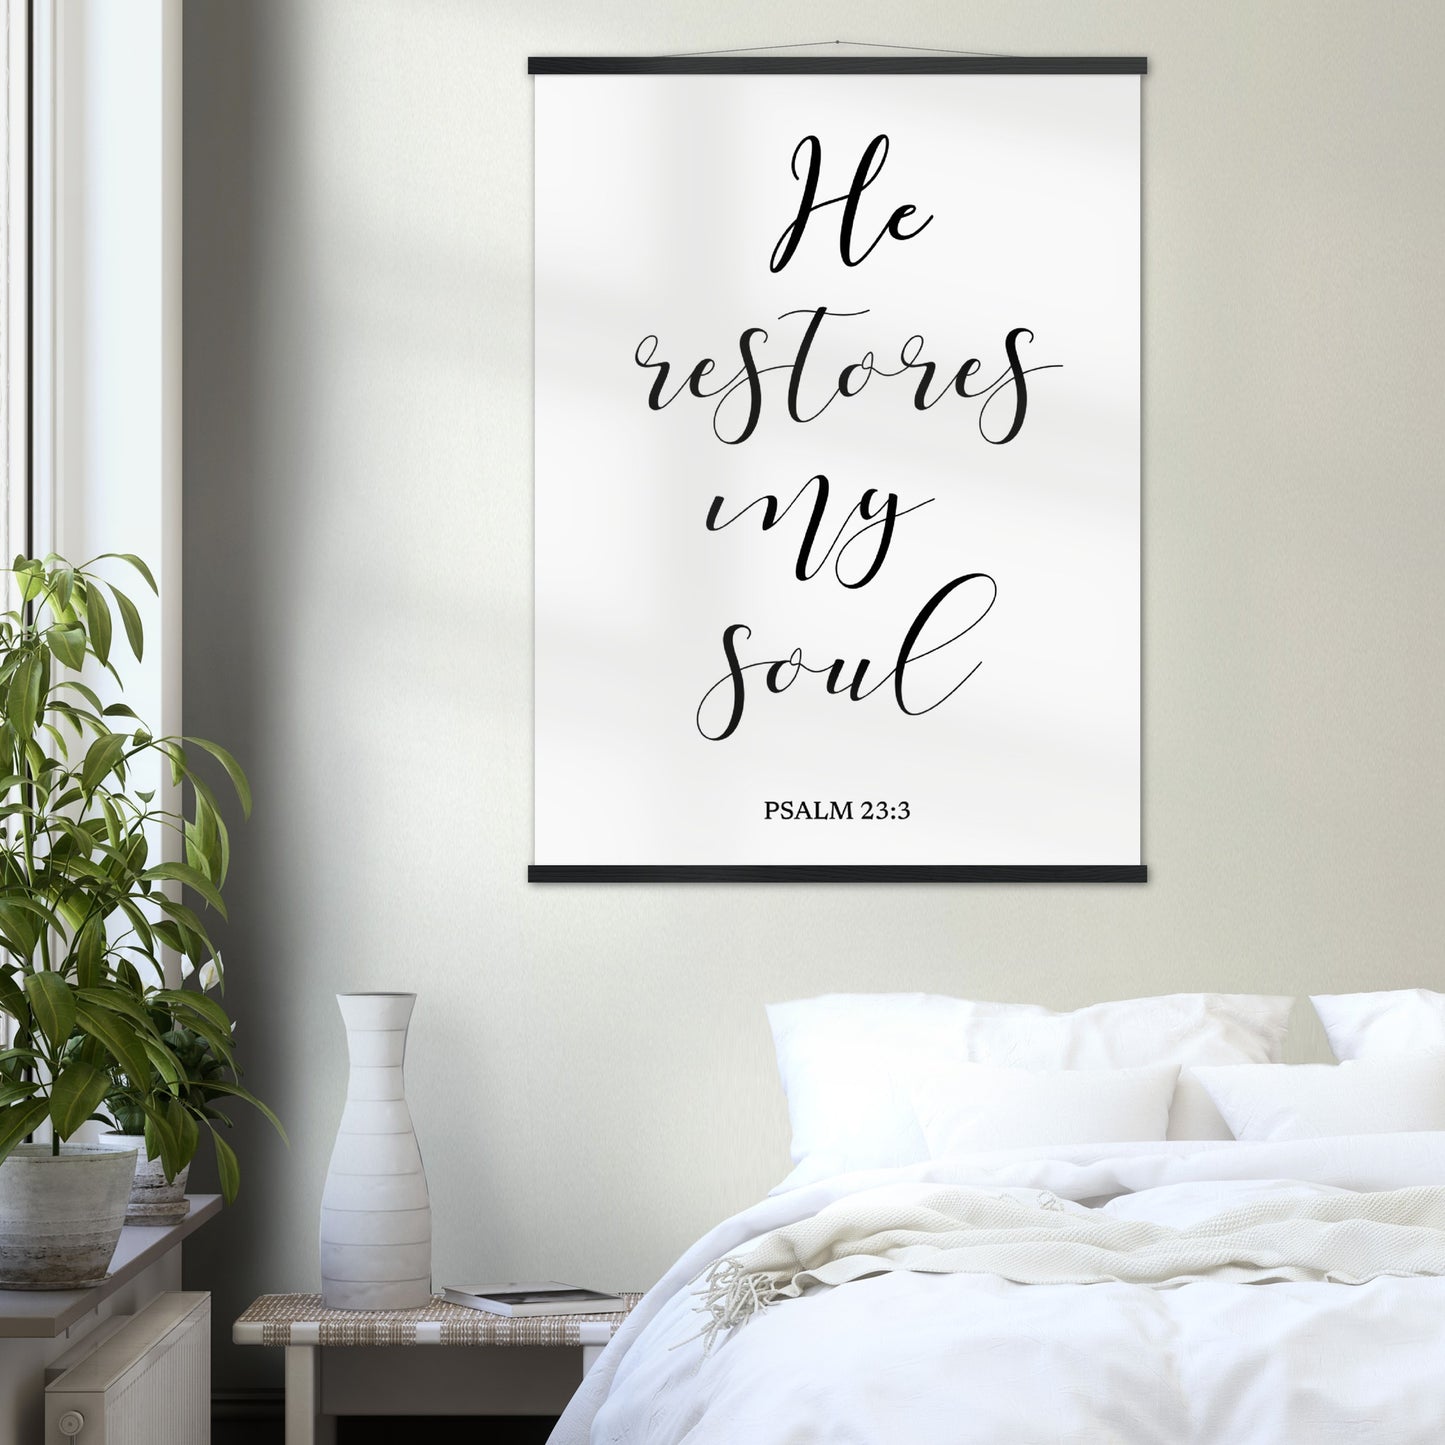 Home Decor | He Restores My Soul | Christian Wall Art | Premium Poster with Banner Wood